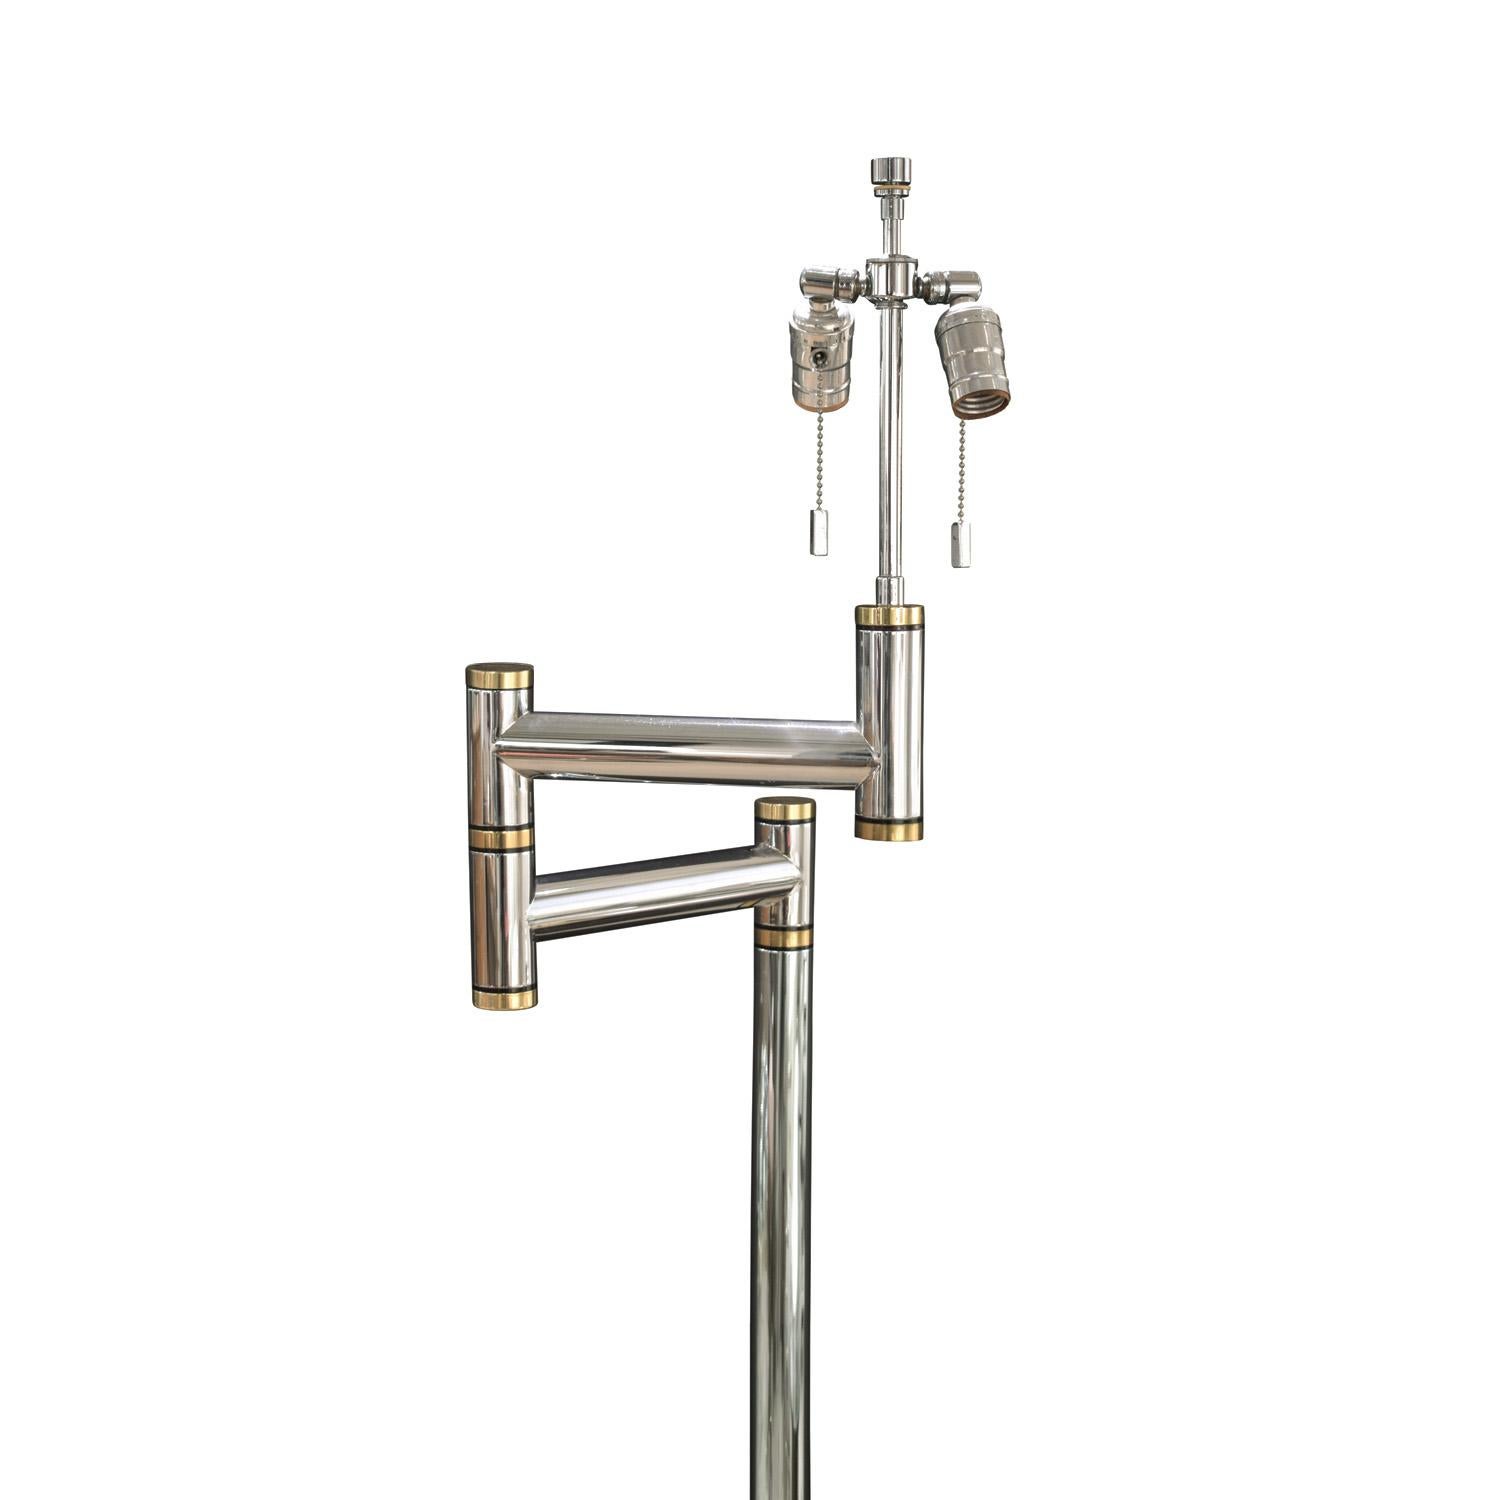 Hand-Crafted Karl Springer Pair of Exceptional Chrome and Brass Swing-Arm Floor Lamps 1980s For Sale